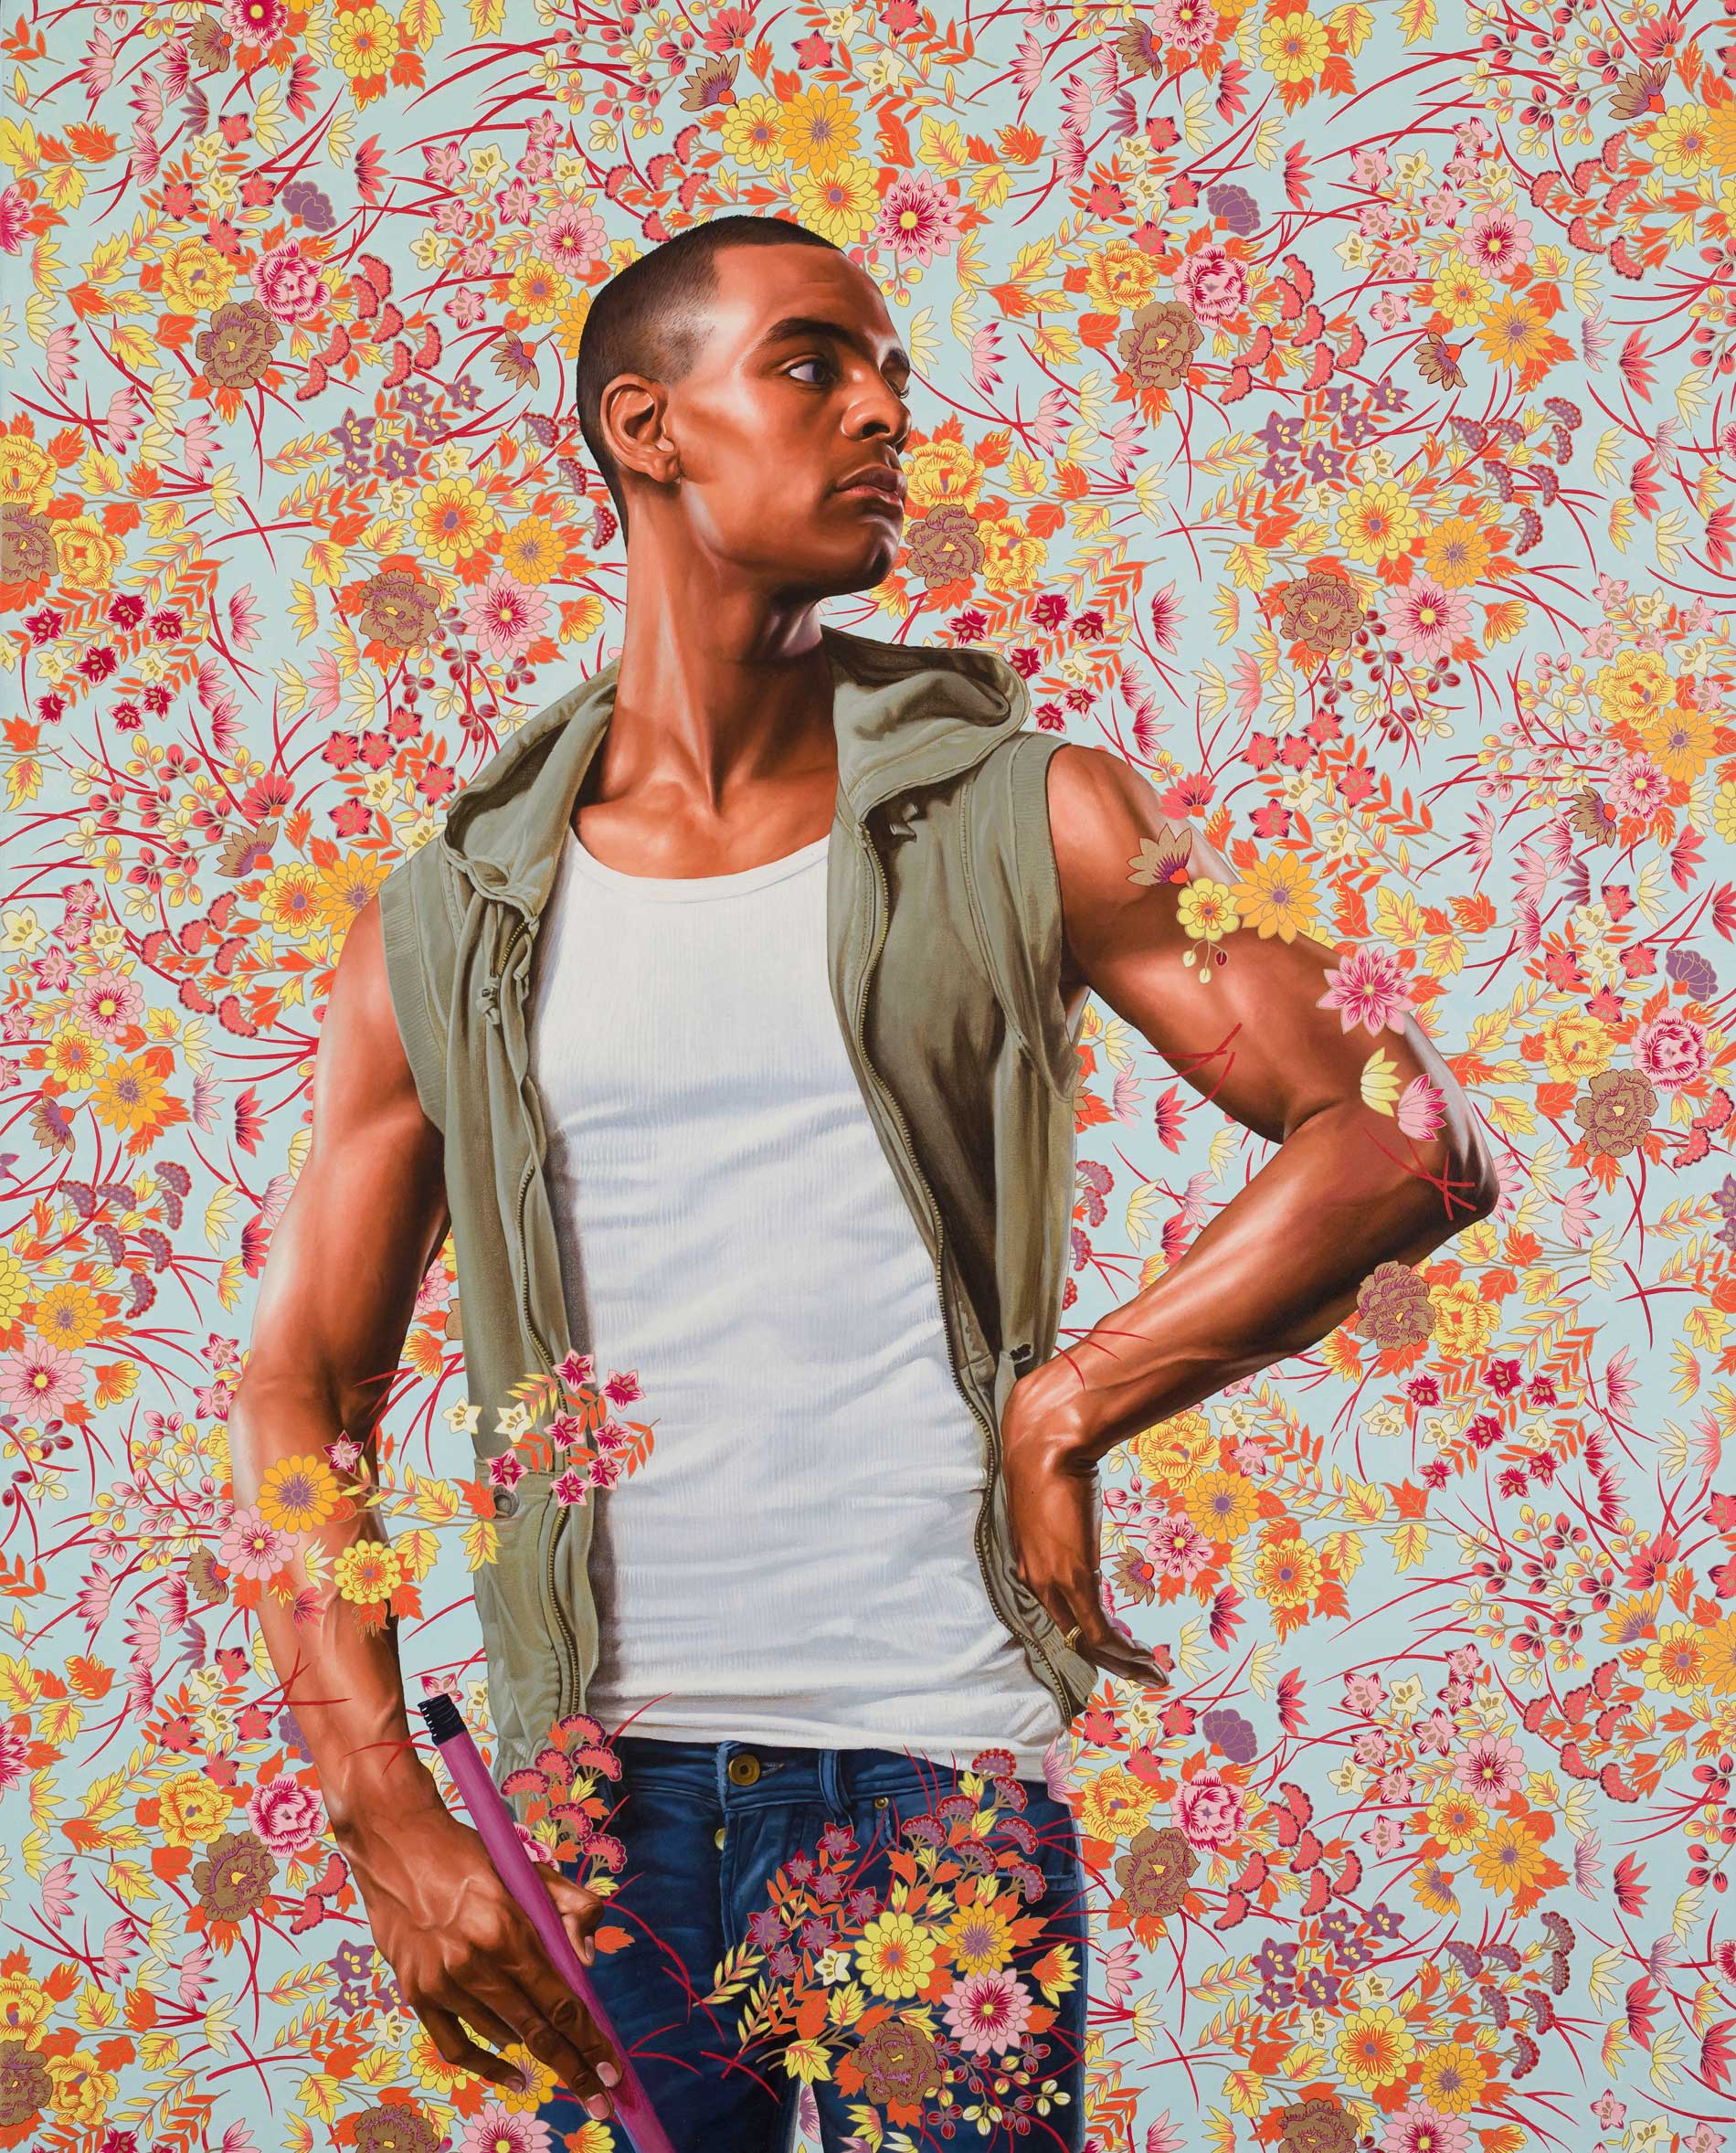 Kehinde Wiley | Selected Works: 2012 | Morthyn Brito II, 2012, Oil on Canvas. | 8